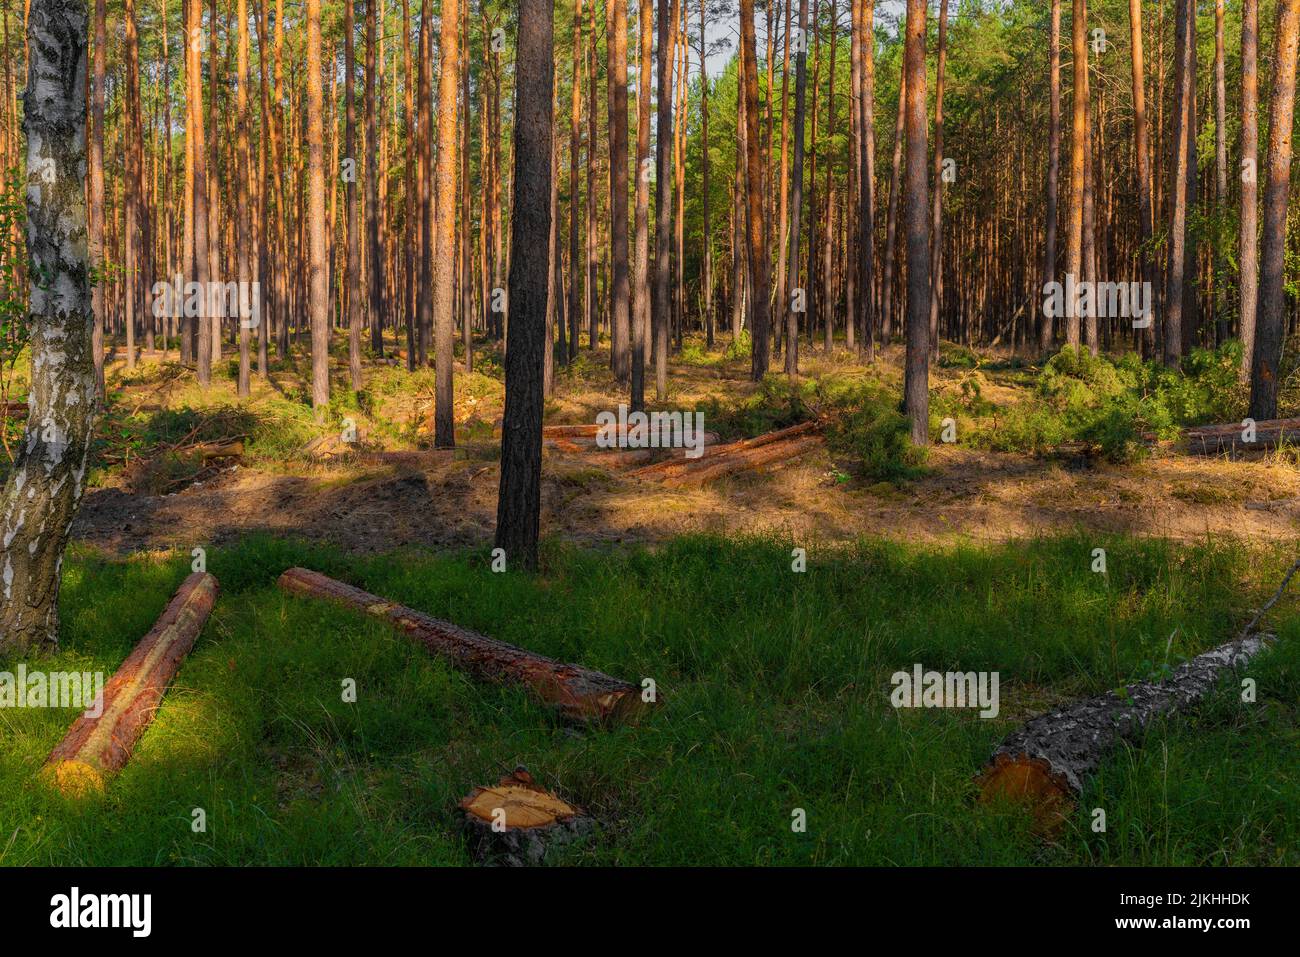 Pine forest in summer after an industrial tree felling, tree trunks lie on the forest floor Stock Photo